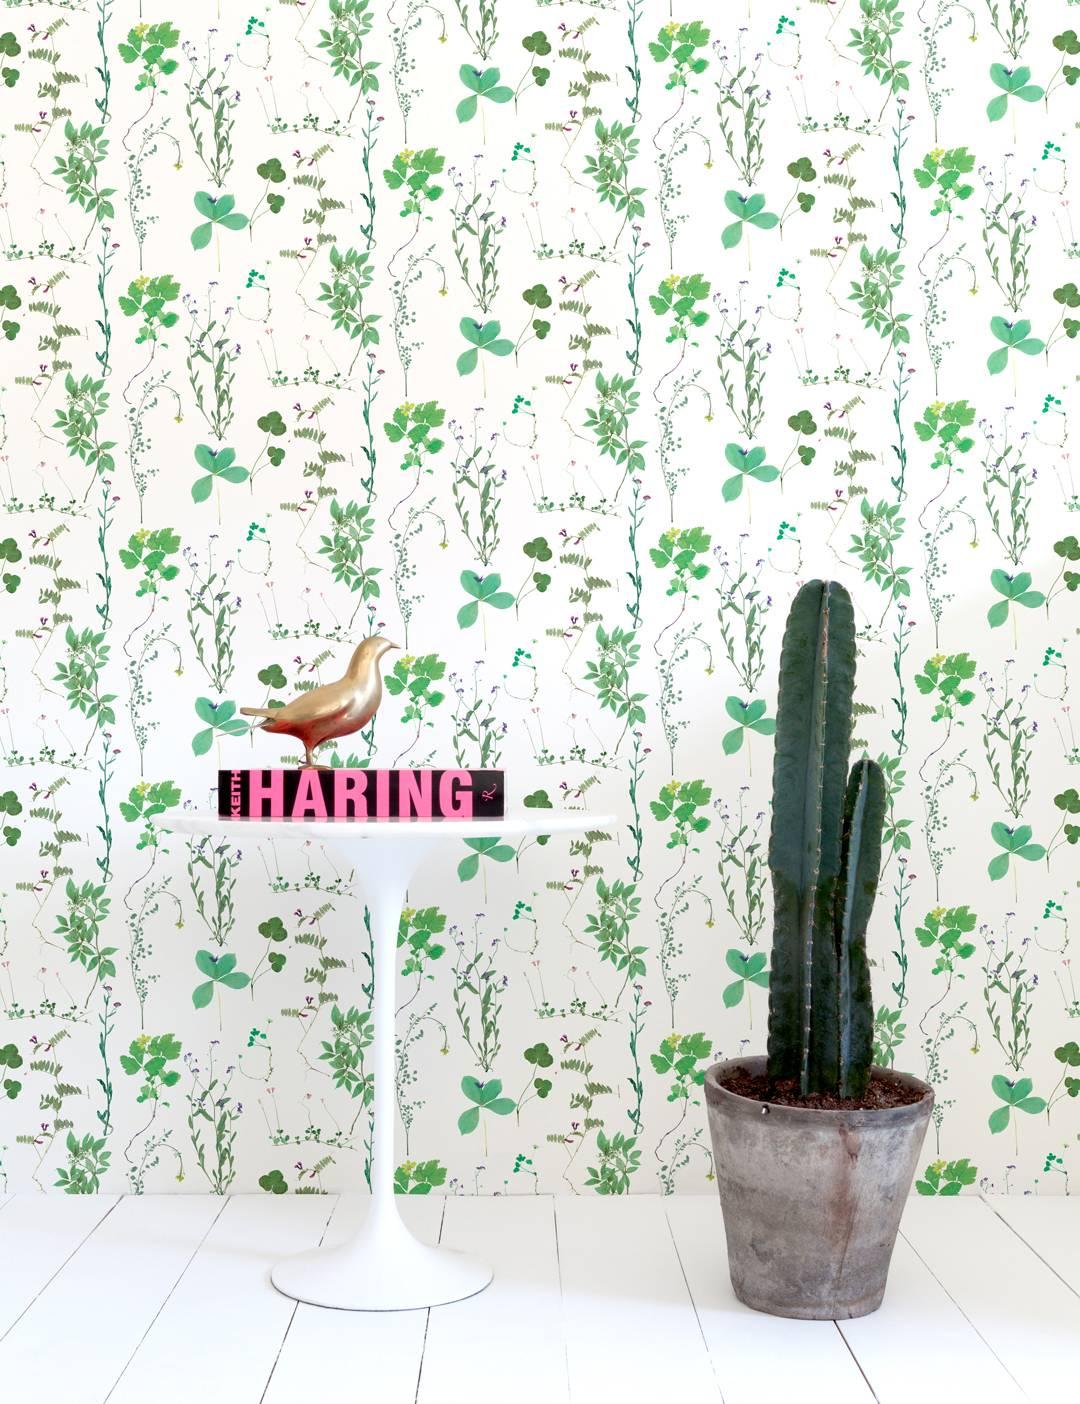 Founder of Ivana Helsinki, Paola Suhonen pressed flowers in a book, creating Herbario years later. Aimée worked with these elements to create a myriad of colorful wallpapers and fabrics to use in the home. 

Samples are available for $18 including